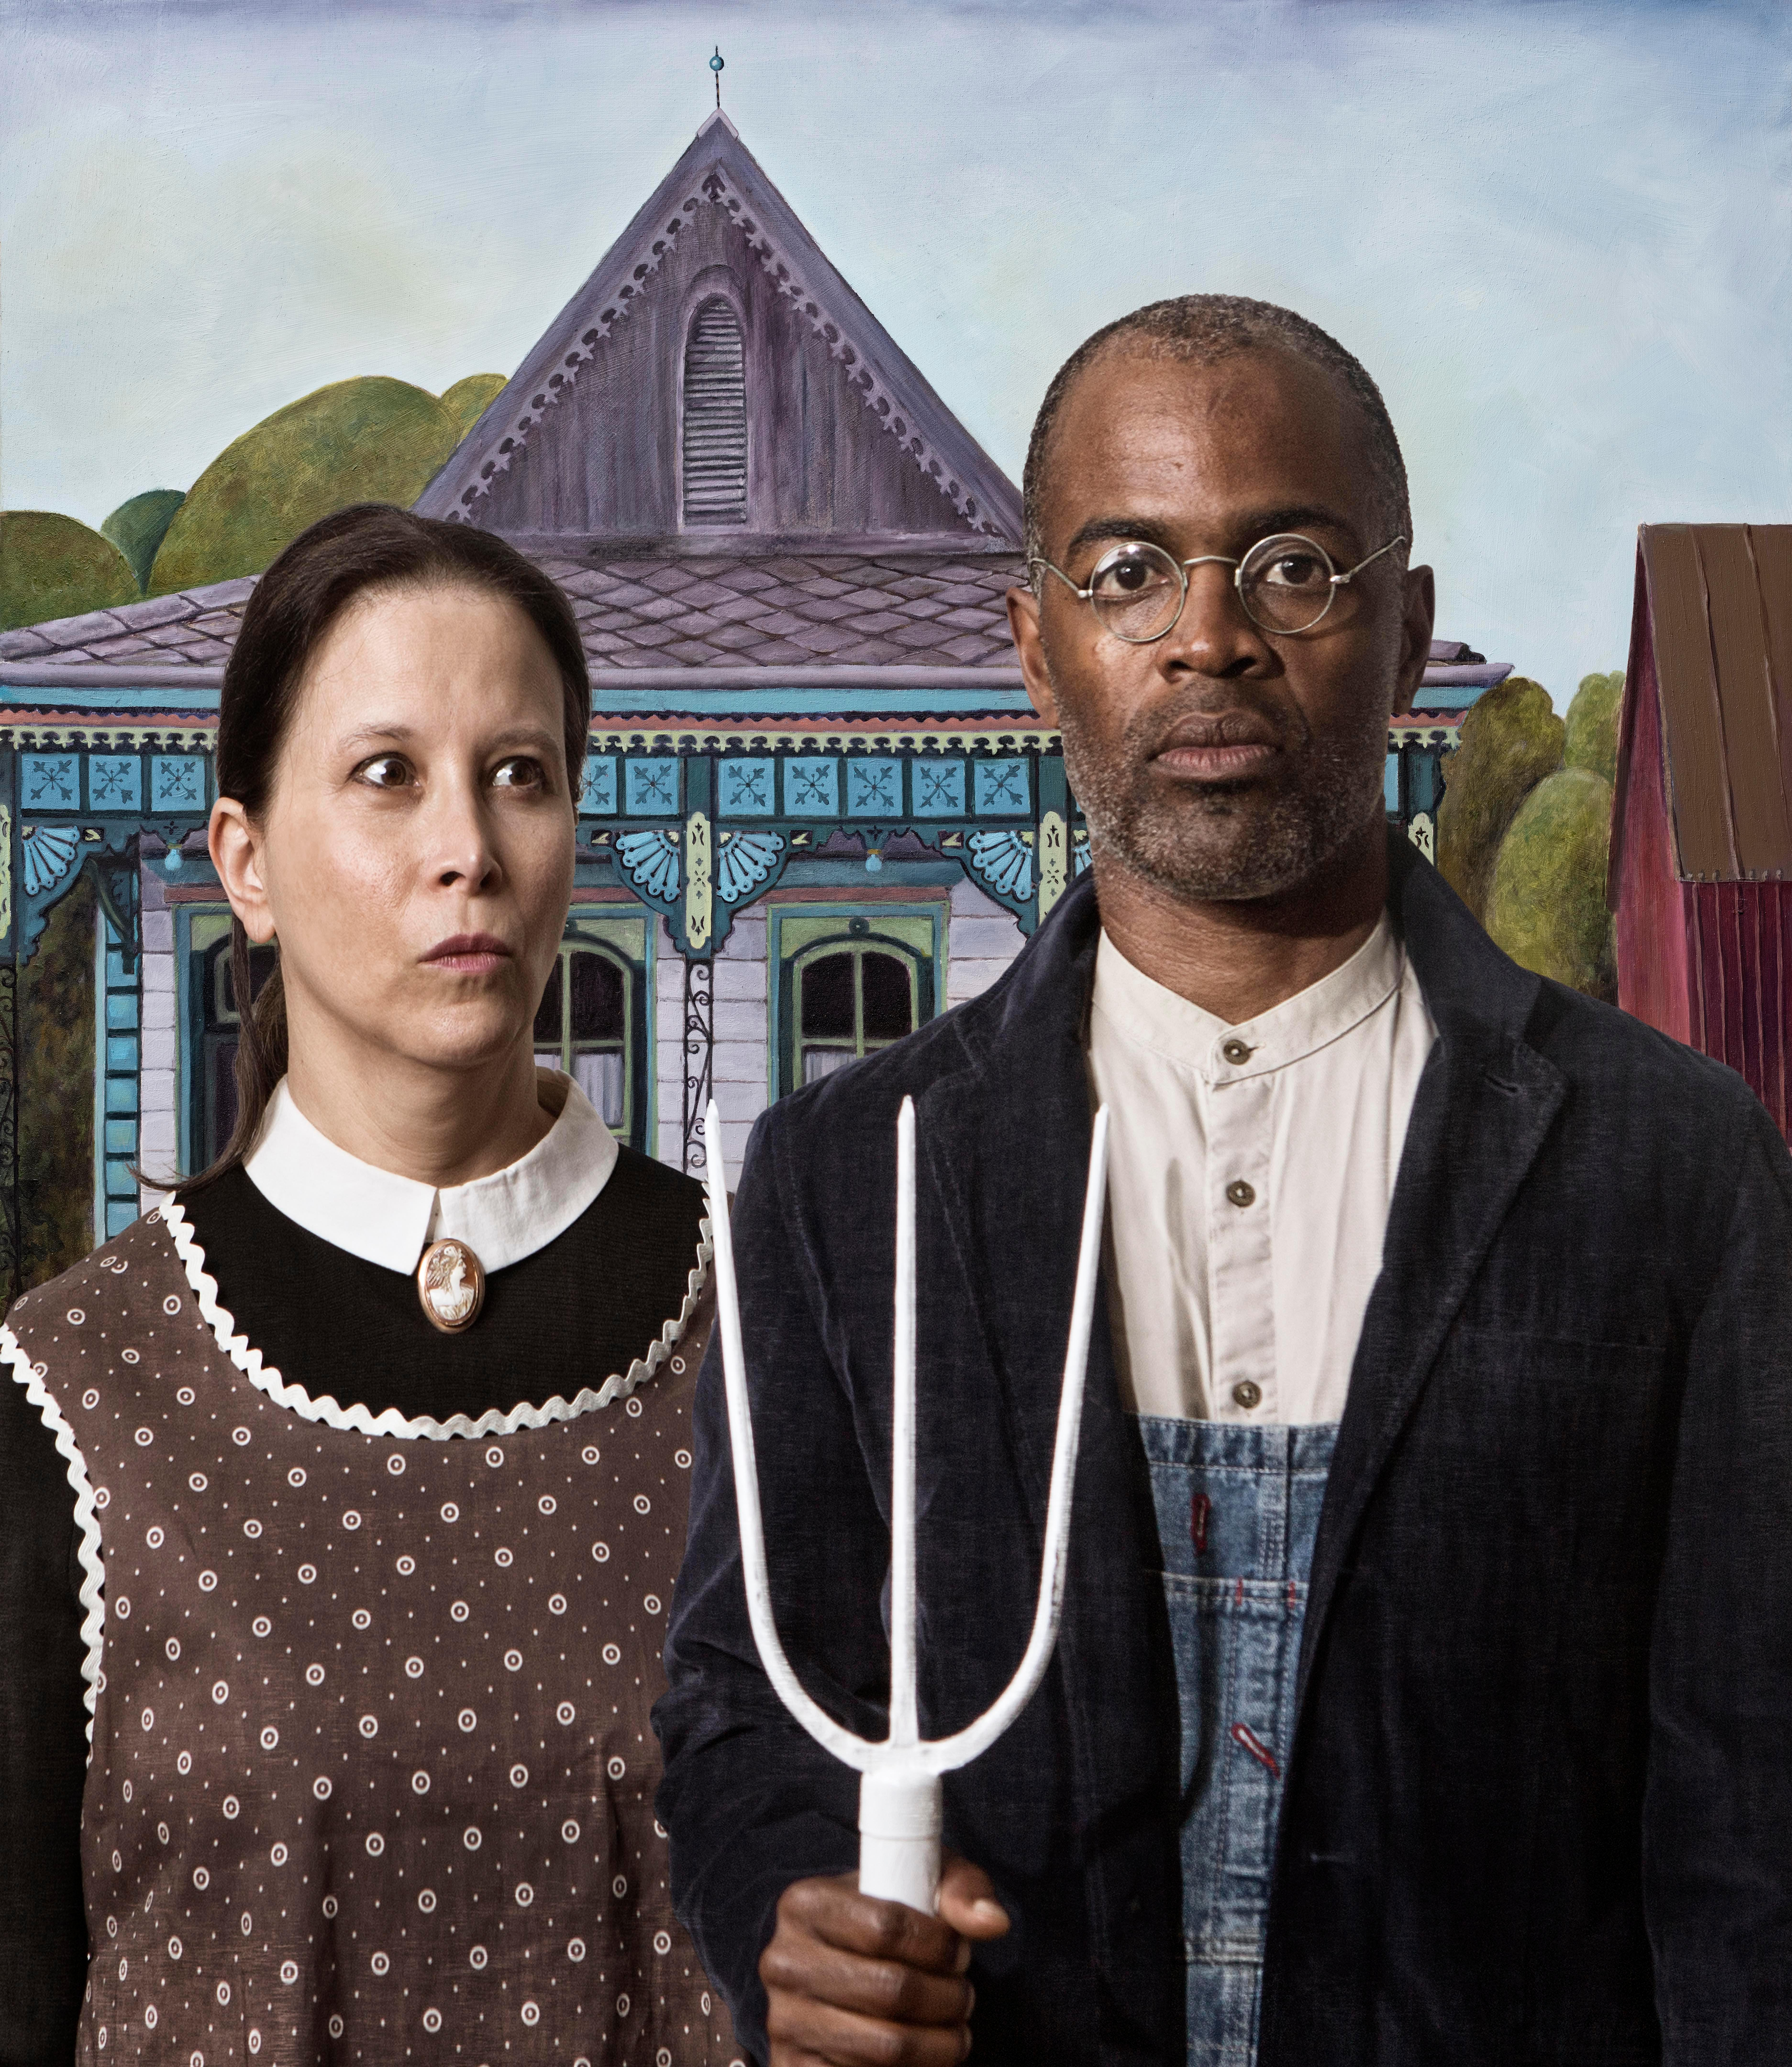 E2 - Kleinveld & Julien Figurative Photograph - Ode to Grant Wood's American Gothic